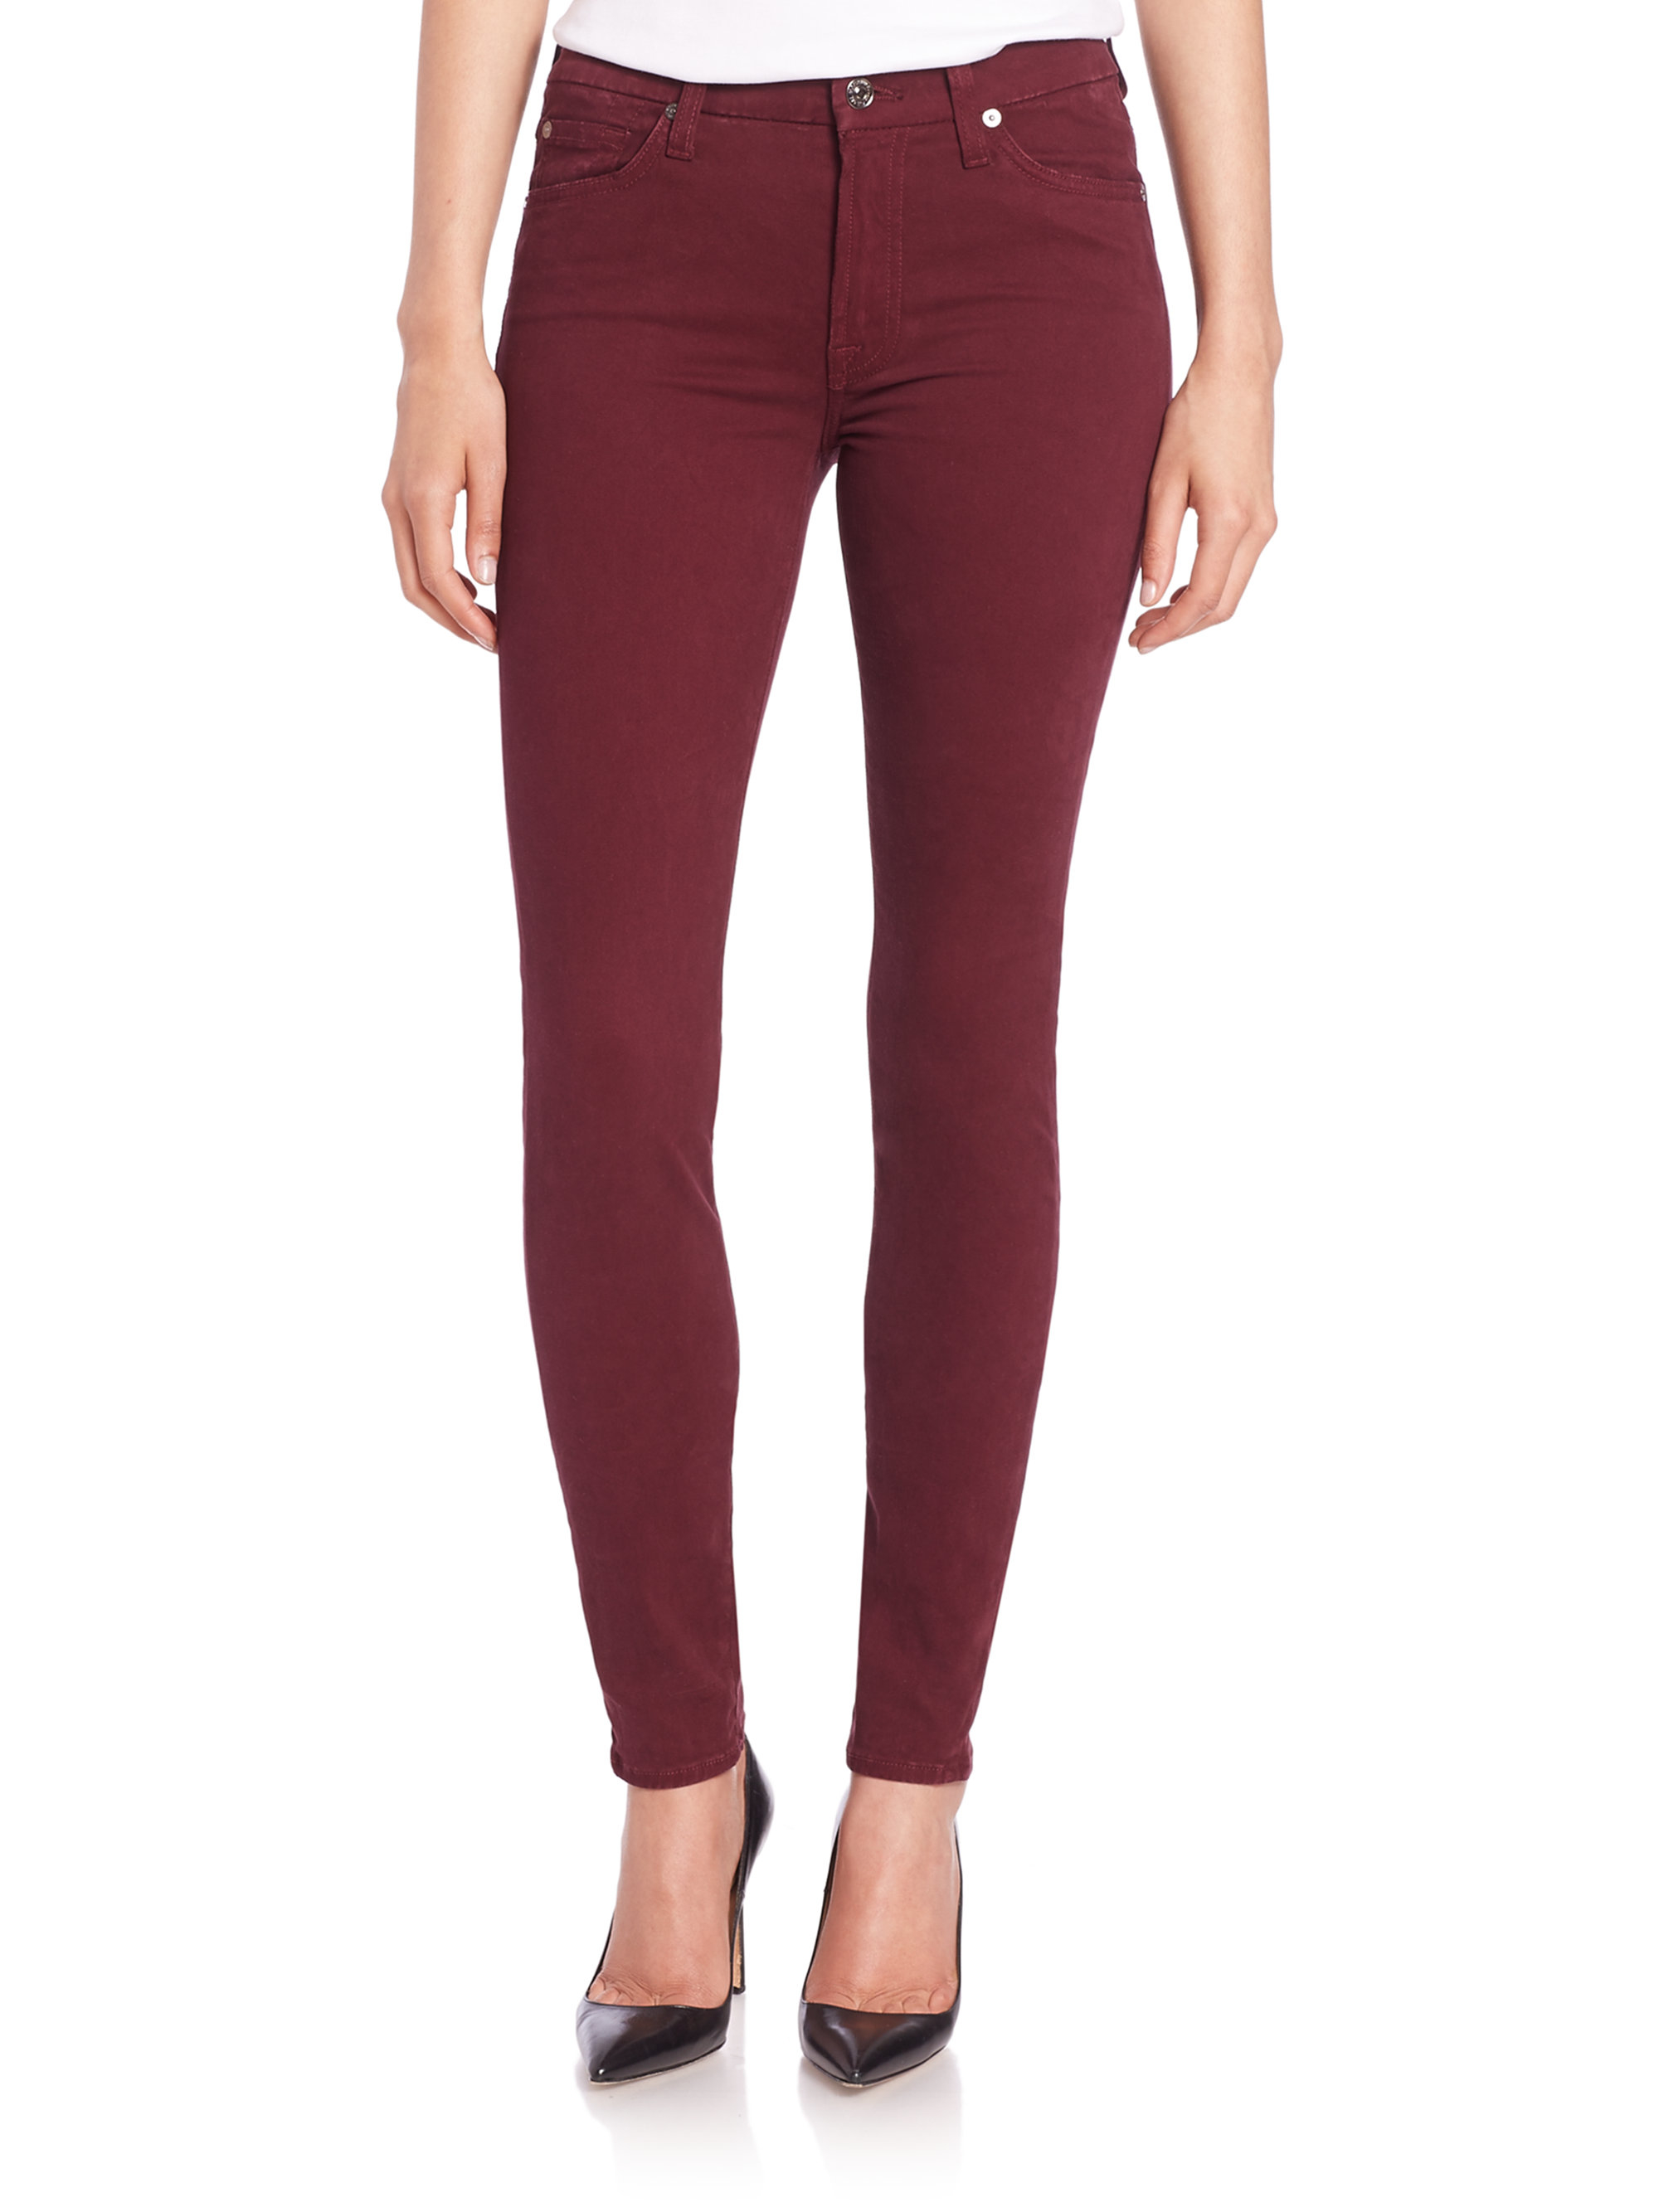 Lyst - 7 For All Mankind Mid-rise Skinny Brushed Sateen Jeans in Red